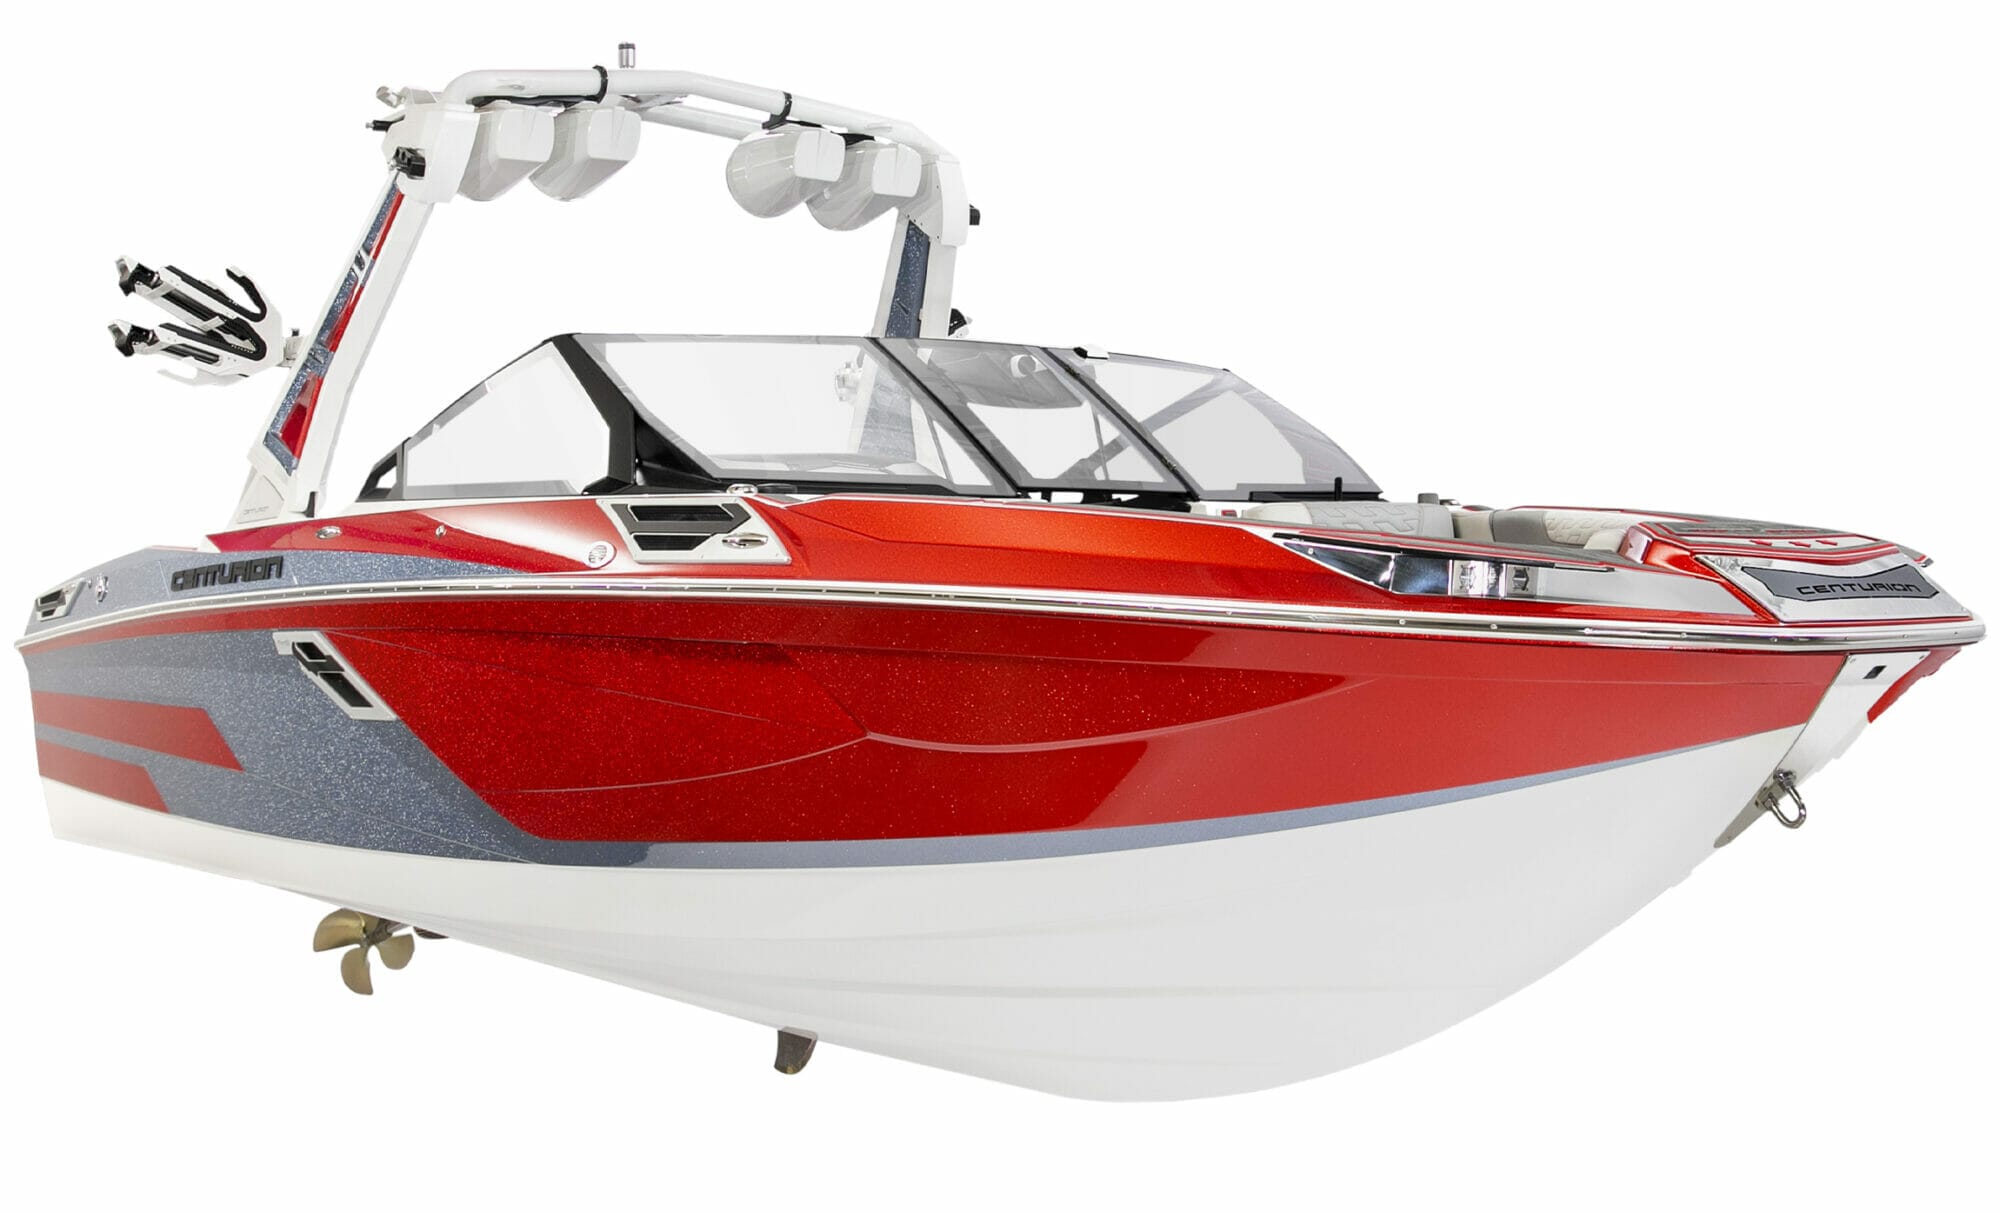 A red and white wakesurf boat on a white background.